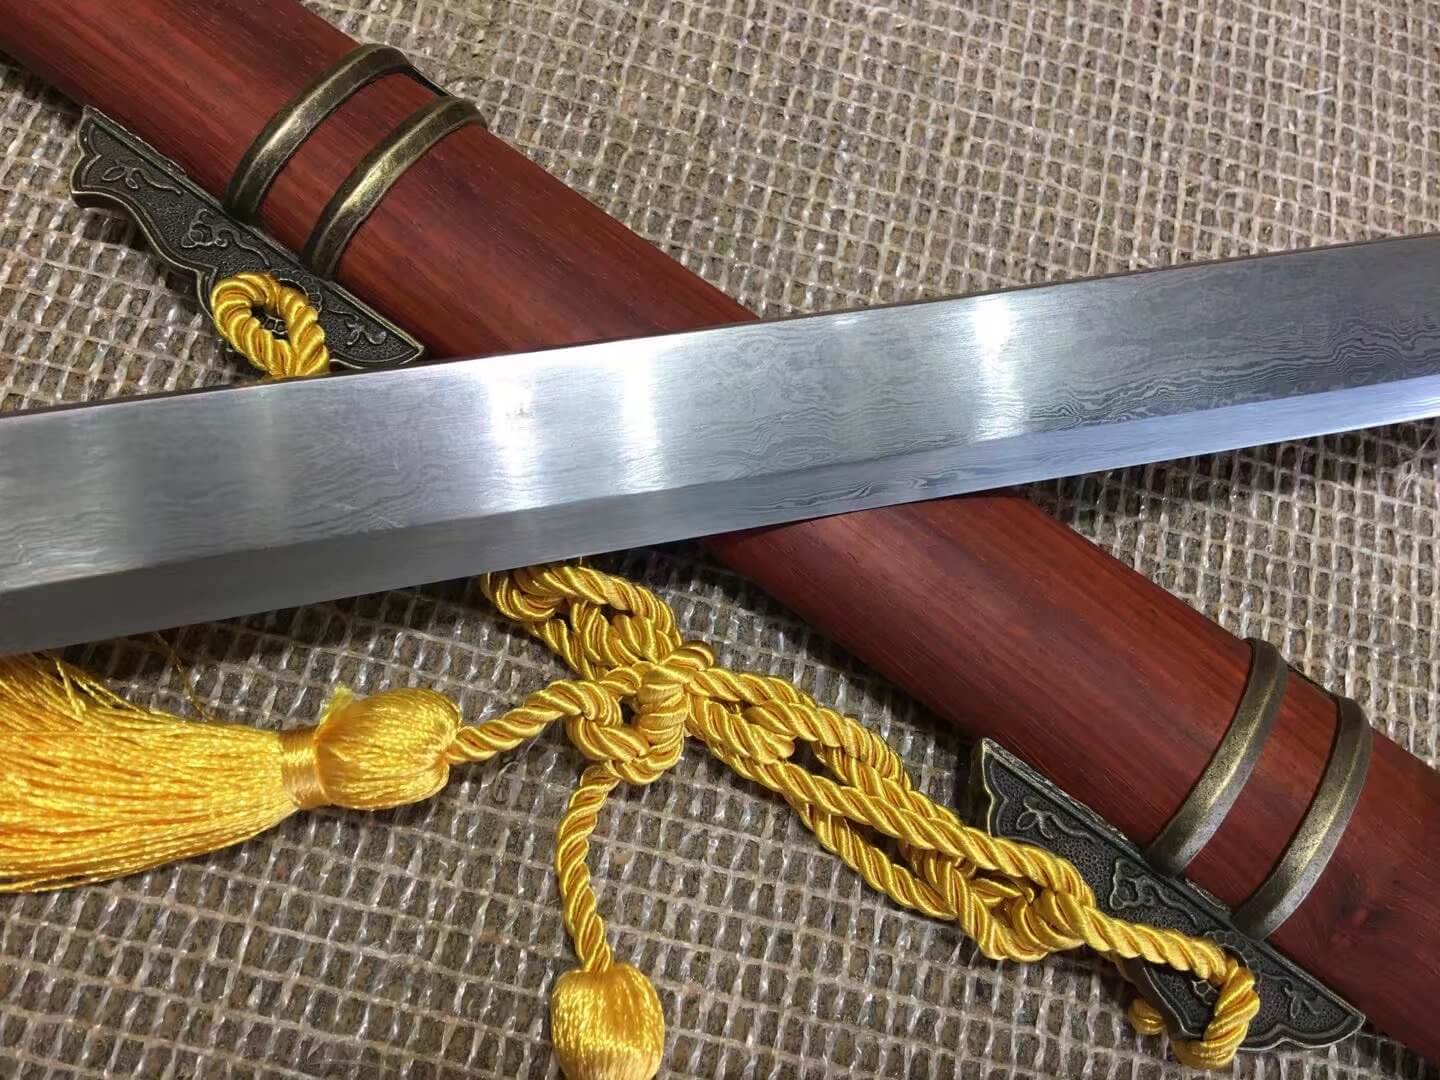 Tang dao,Damascus steel blade,Redwood scabbard,Alloy fitings,Full tang - Chinese sword shop